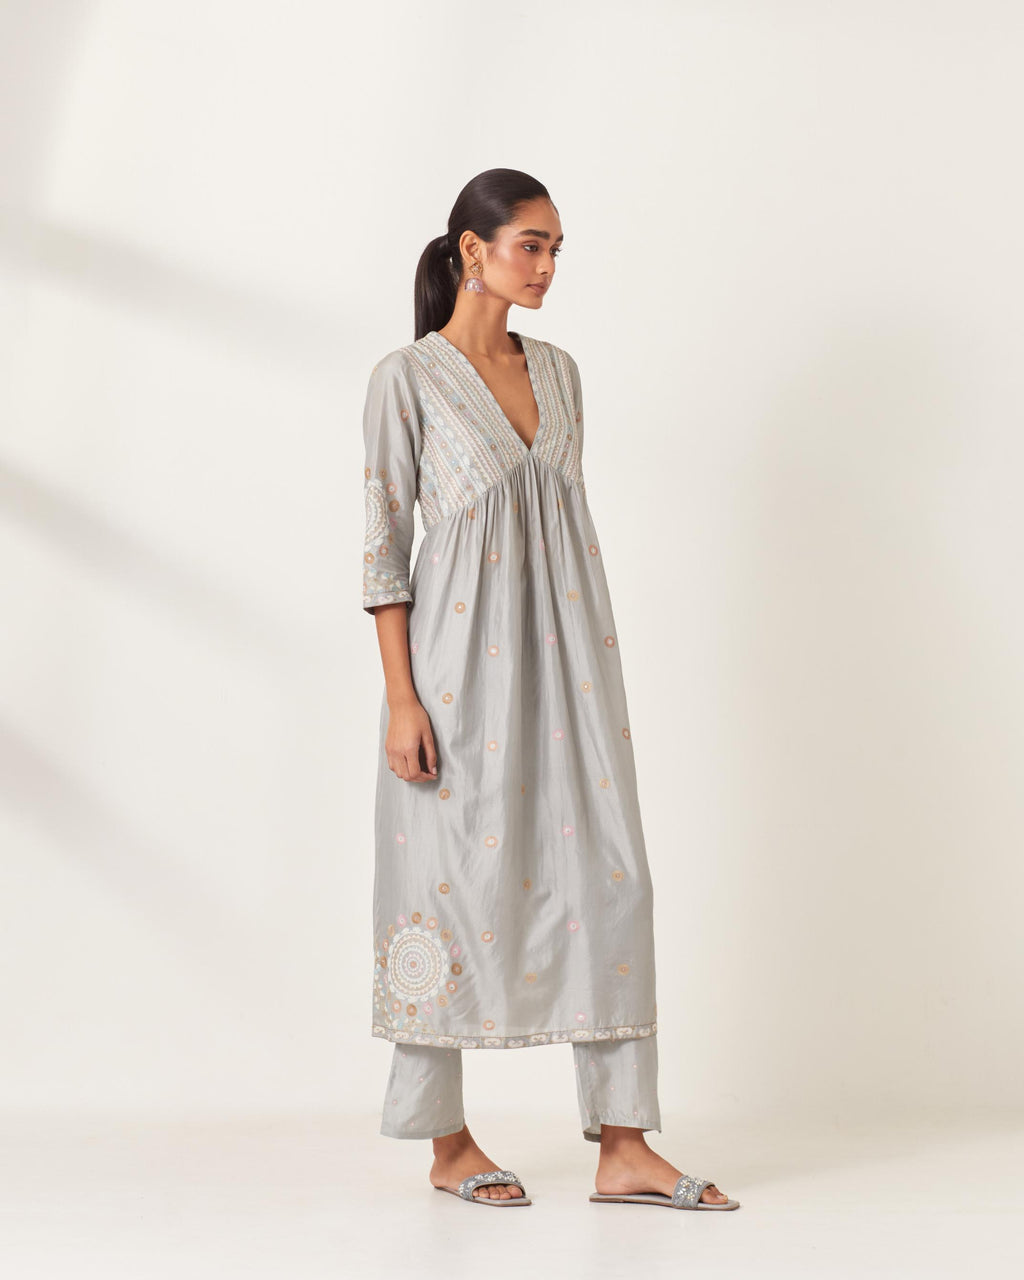 Blue silk kurta dress set with appliqué stripes along with aari threadwork flowers and floral trellises along with a circular appliqued motif and fine gathers at empire line.